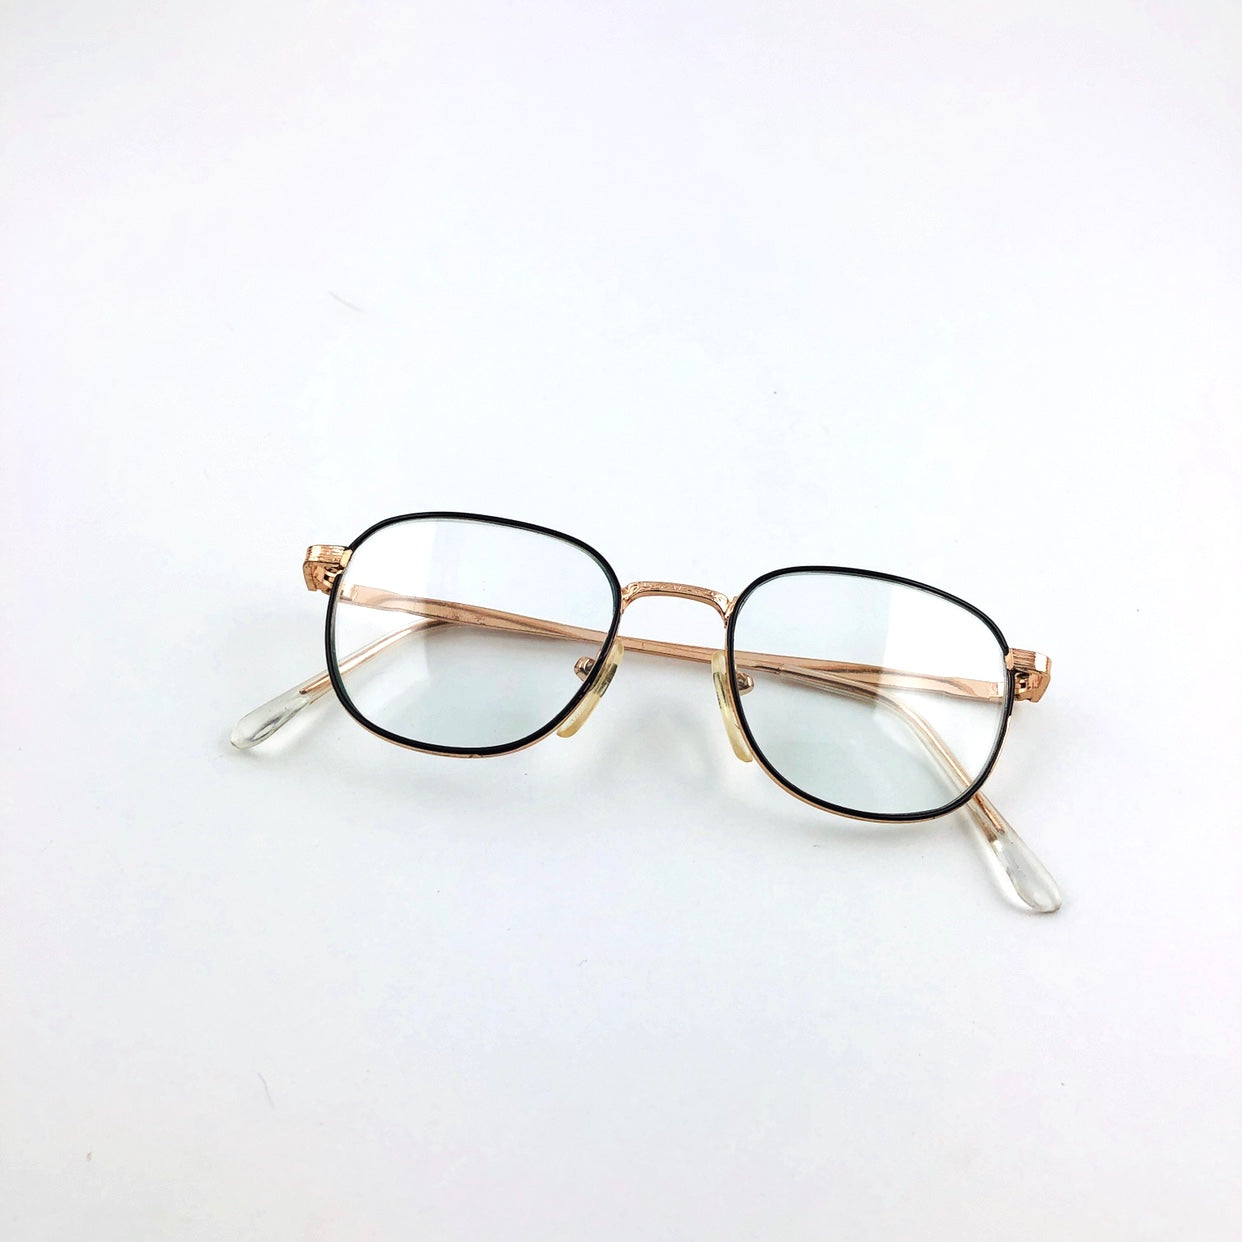 Vintage Small Sized 90s Clear Metal Framed Specs - Clear